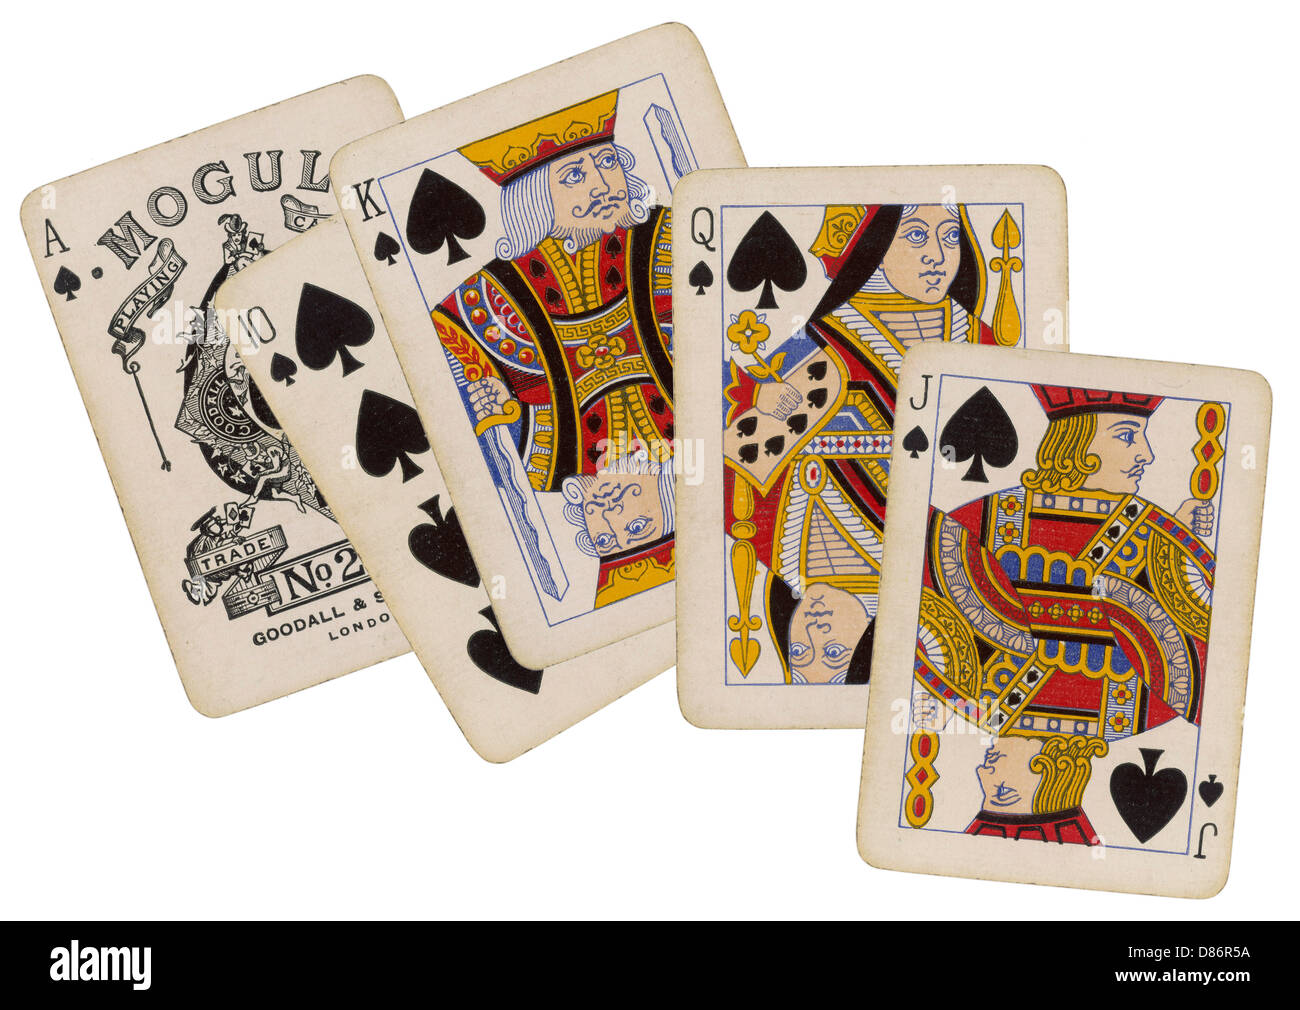 King, Queen and Jack playing cards (coloured wood engraving)